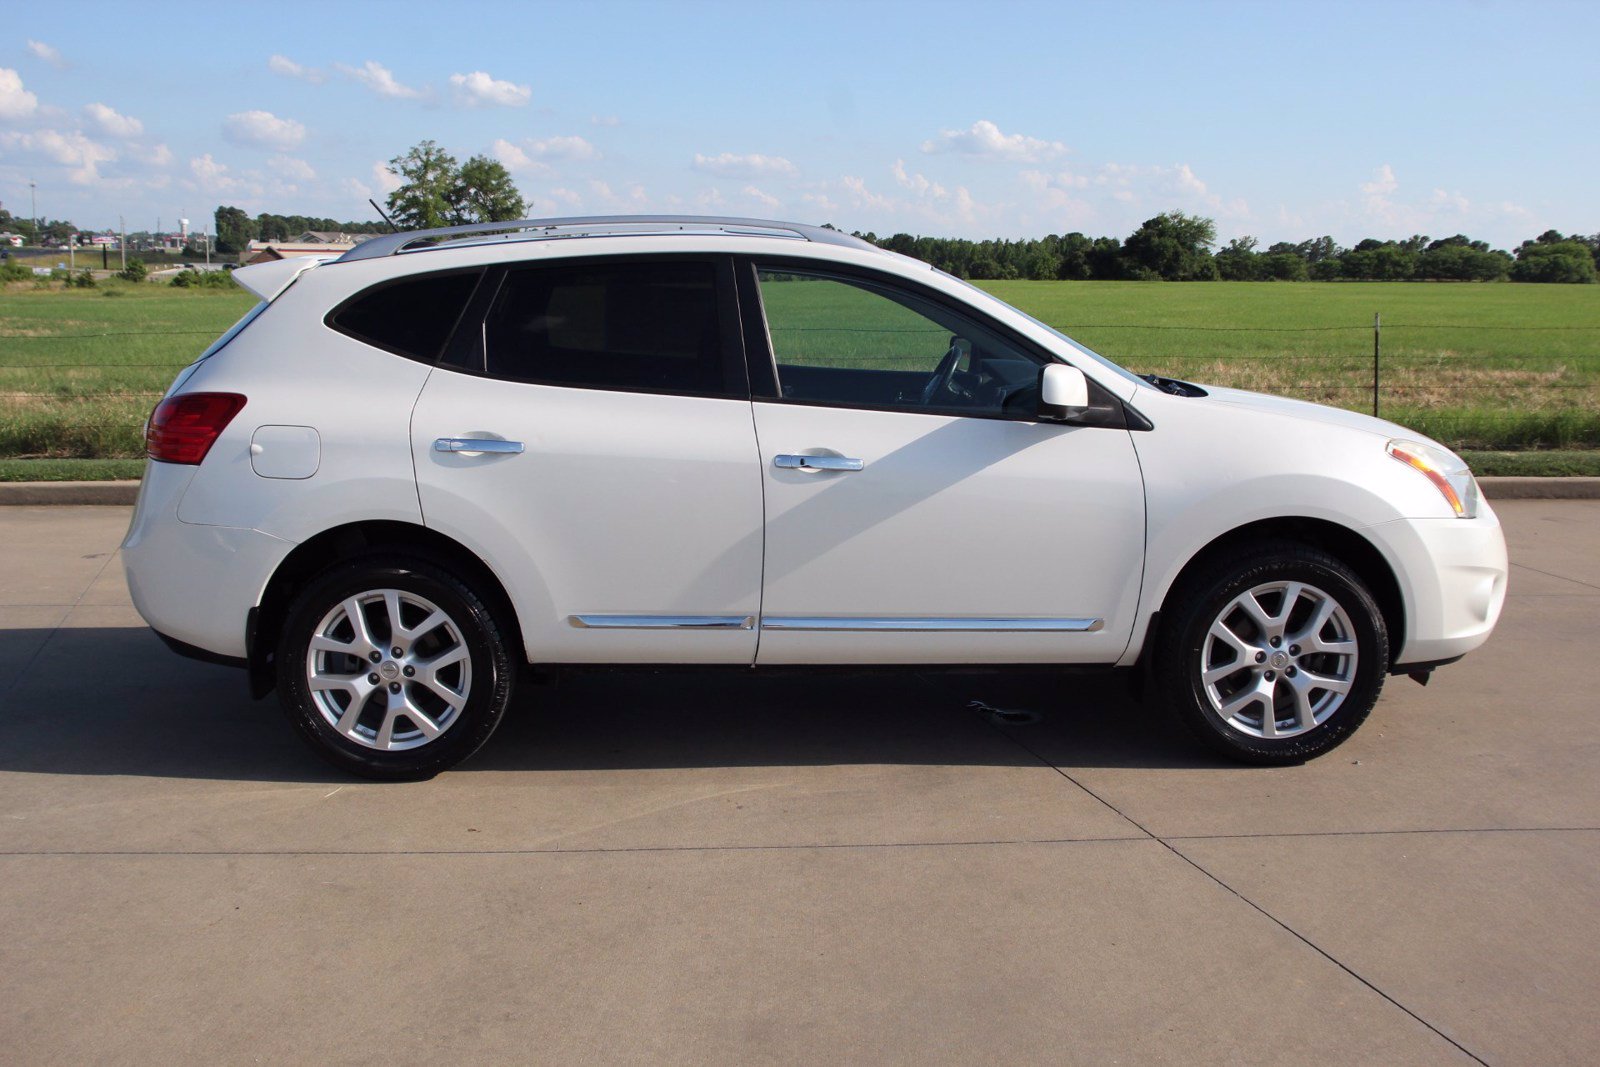 Pre-Owned 2012 Nissan Rogue SL SUV in Longview #A3972A | Peters ...